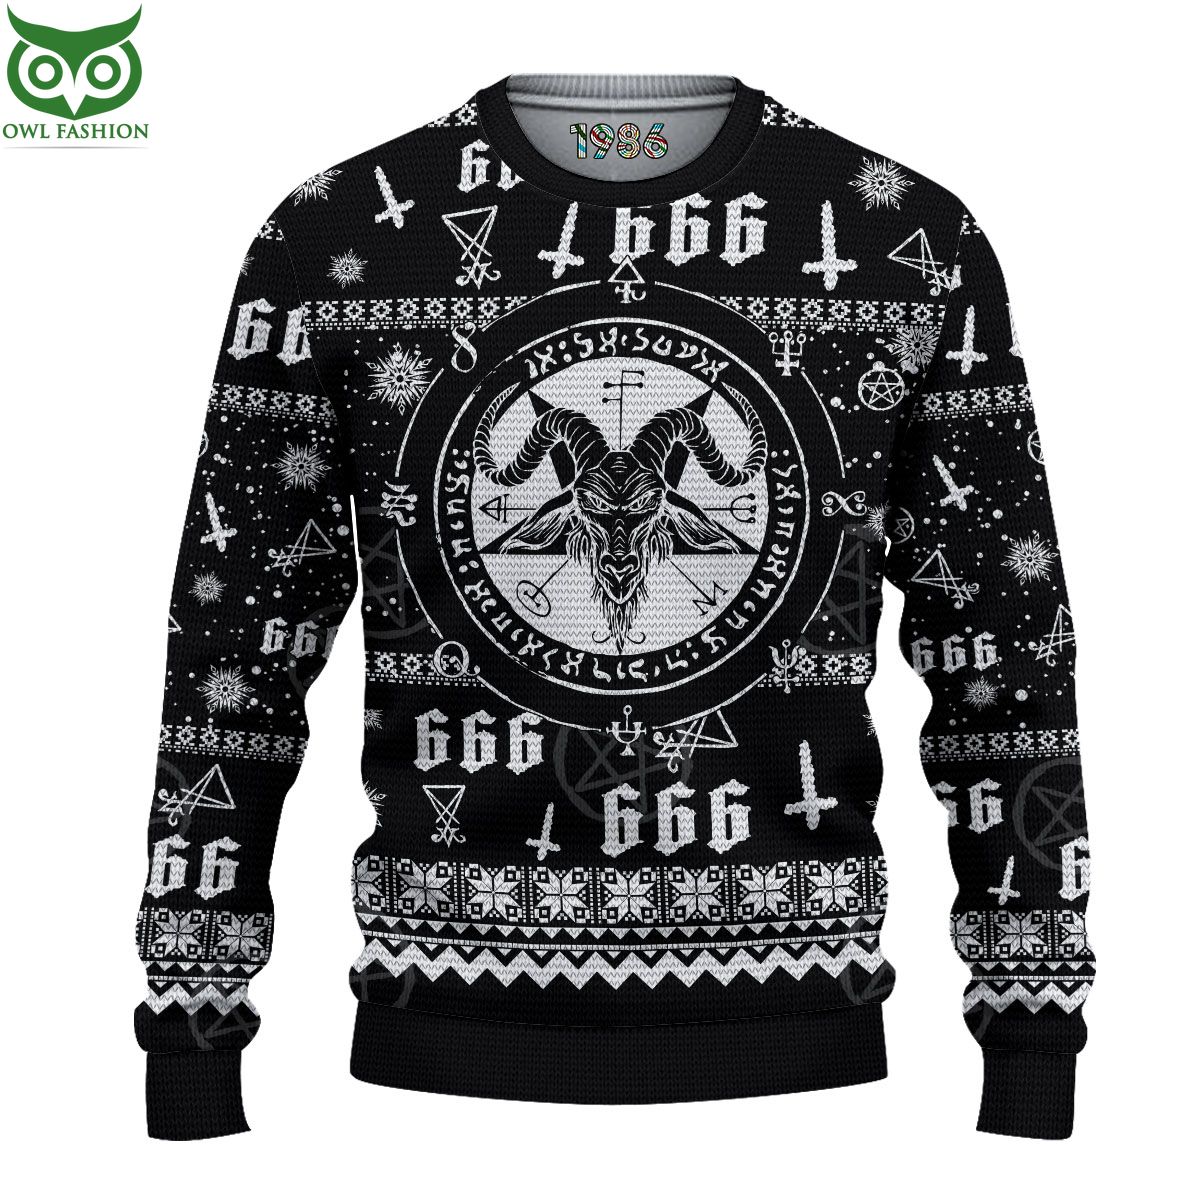 satan 666 demon ugly sweater jumpers 1 KXvNm.jpg